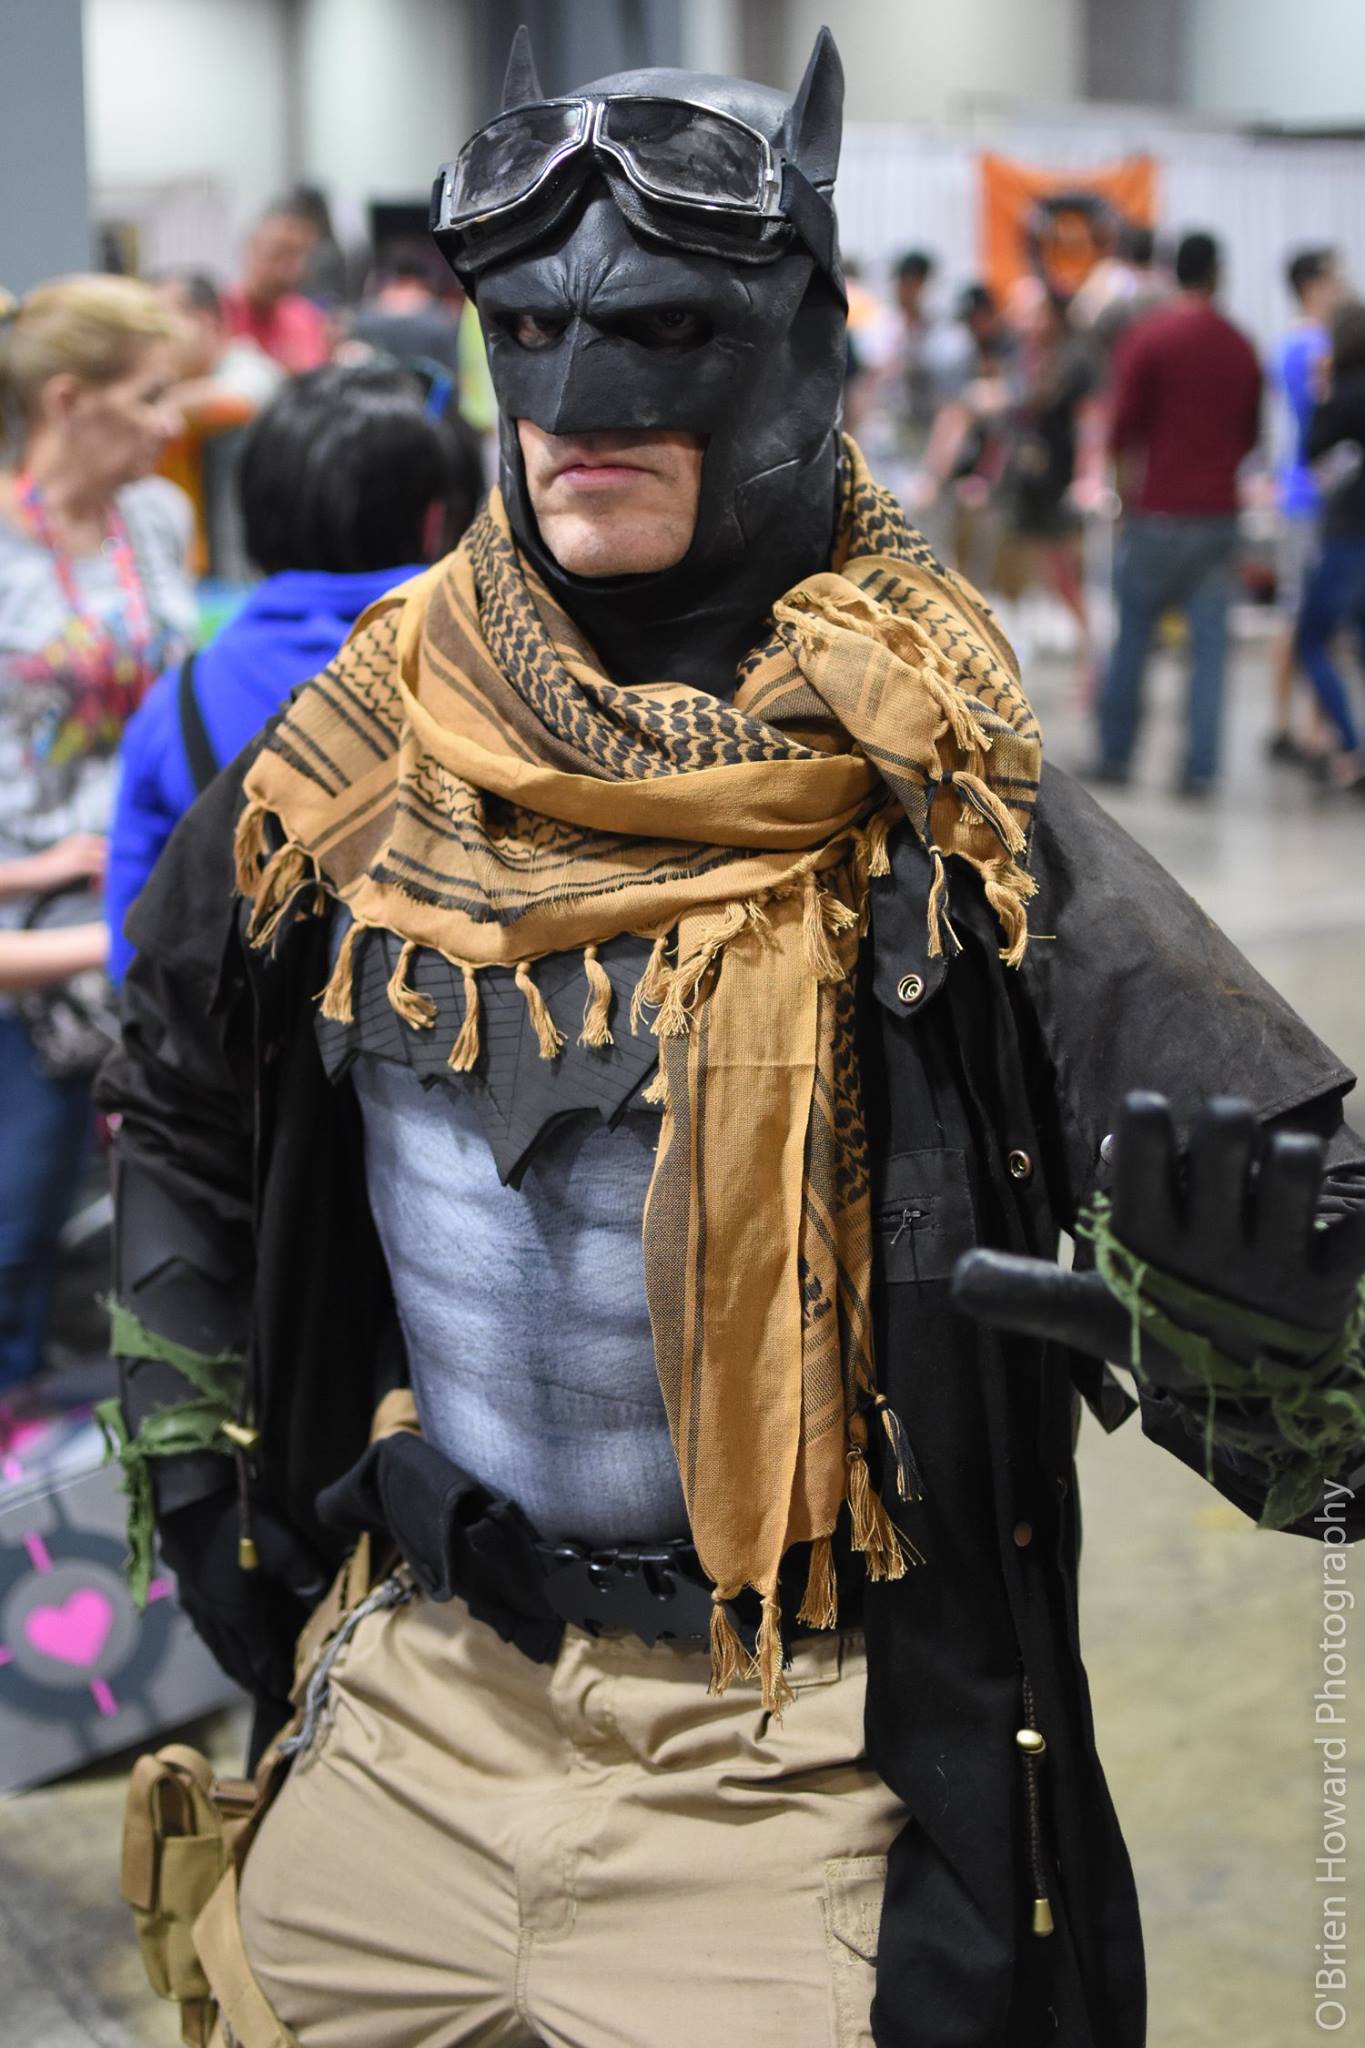 Knightmare Batman: Awesome Con 2016 | RPF Costume and Prop Maker Community